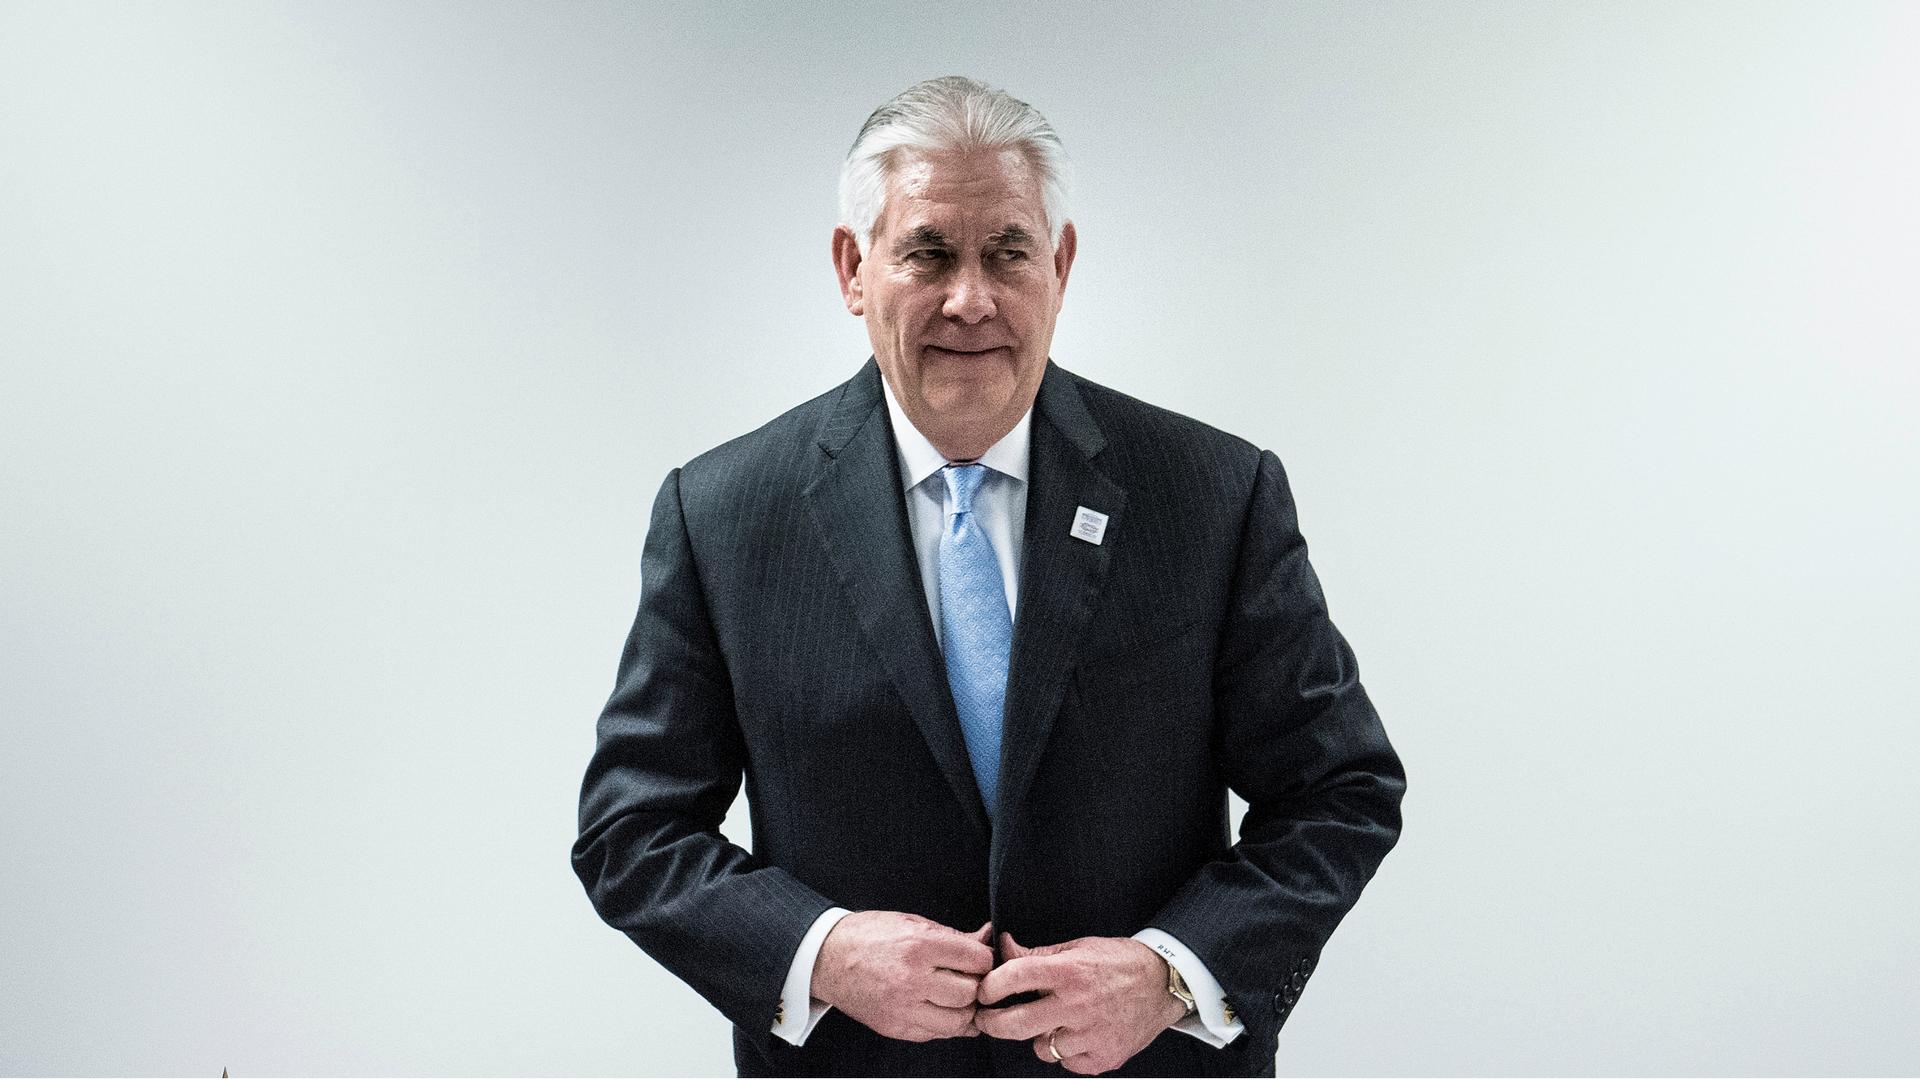 US Secretary of State Rex Tillerson takes his seat for a meeting with his Japanese and South Korean counterparts at the World Conference Center in Bonn, Germany, Feb. 16, 2017.